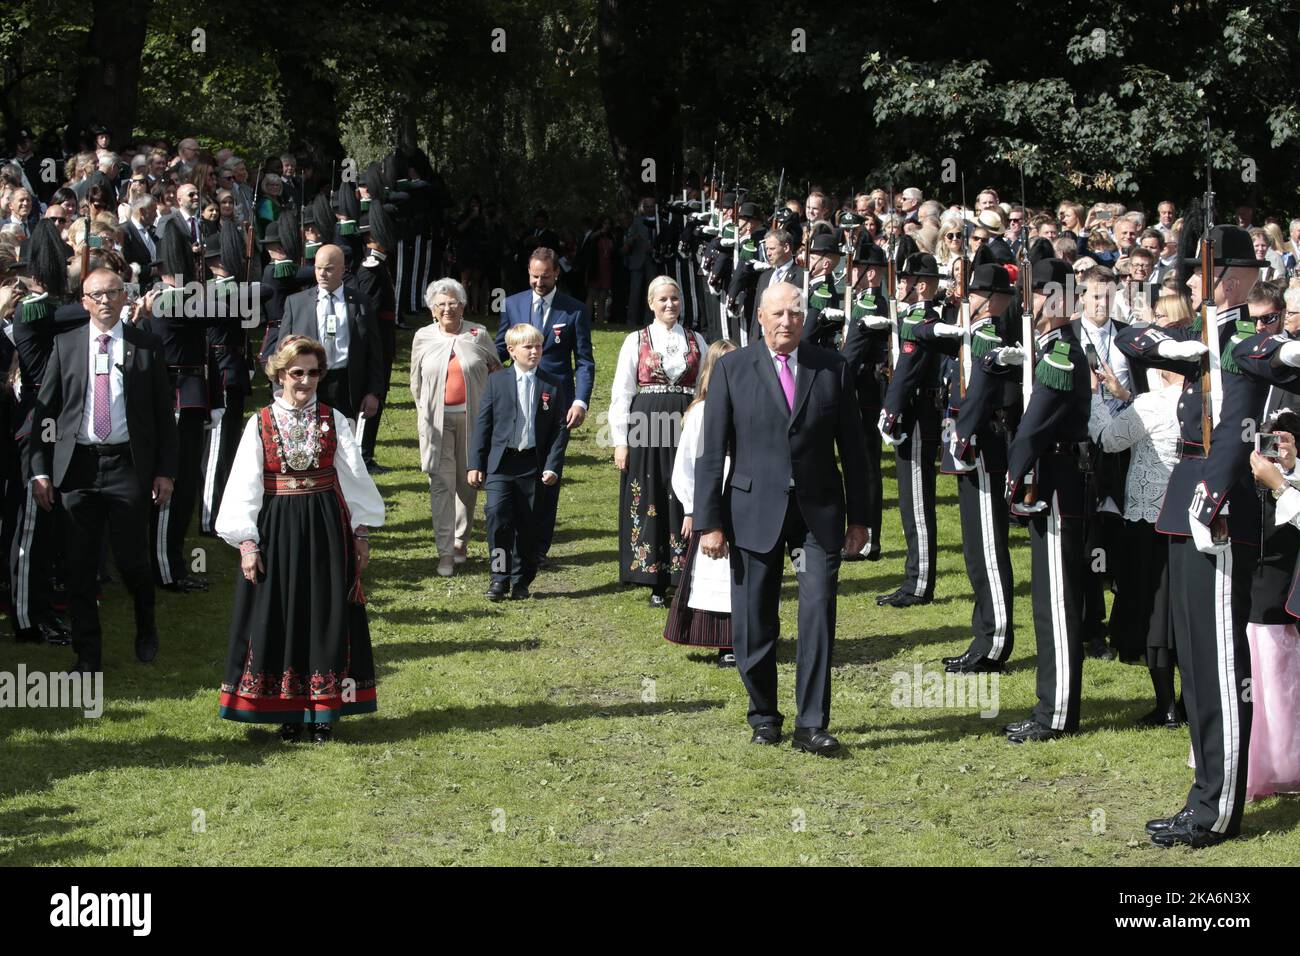 Oslo, Norway 20160901. Their Majesties The King and Queen host i garden party for 1 500 guests in the Palace Park. King Harald (right) and Queen Sonja (left) arrive with Crown Prince Haakon (at the very back), Crown Princess Mette-Marit, Princess Ingrid Alexandra, Prince Sverre Magnus and Princess Astrid, Mrs Ferner also participates in the company where 1,500 people are invited. Photo: Lise Aaserud / NTB scanpix [LANUAGESEPARATOR] Oslo 20160901. Kong Harald og dronning Sonja inviterer til hageselskap i Dronningparken. Kronprins Haakon, kronprinsesse Mette-Marit og prinsesses Astrid deltar og Stock Photo